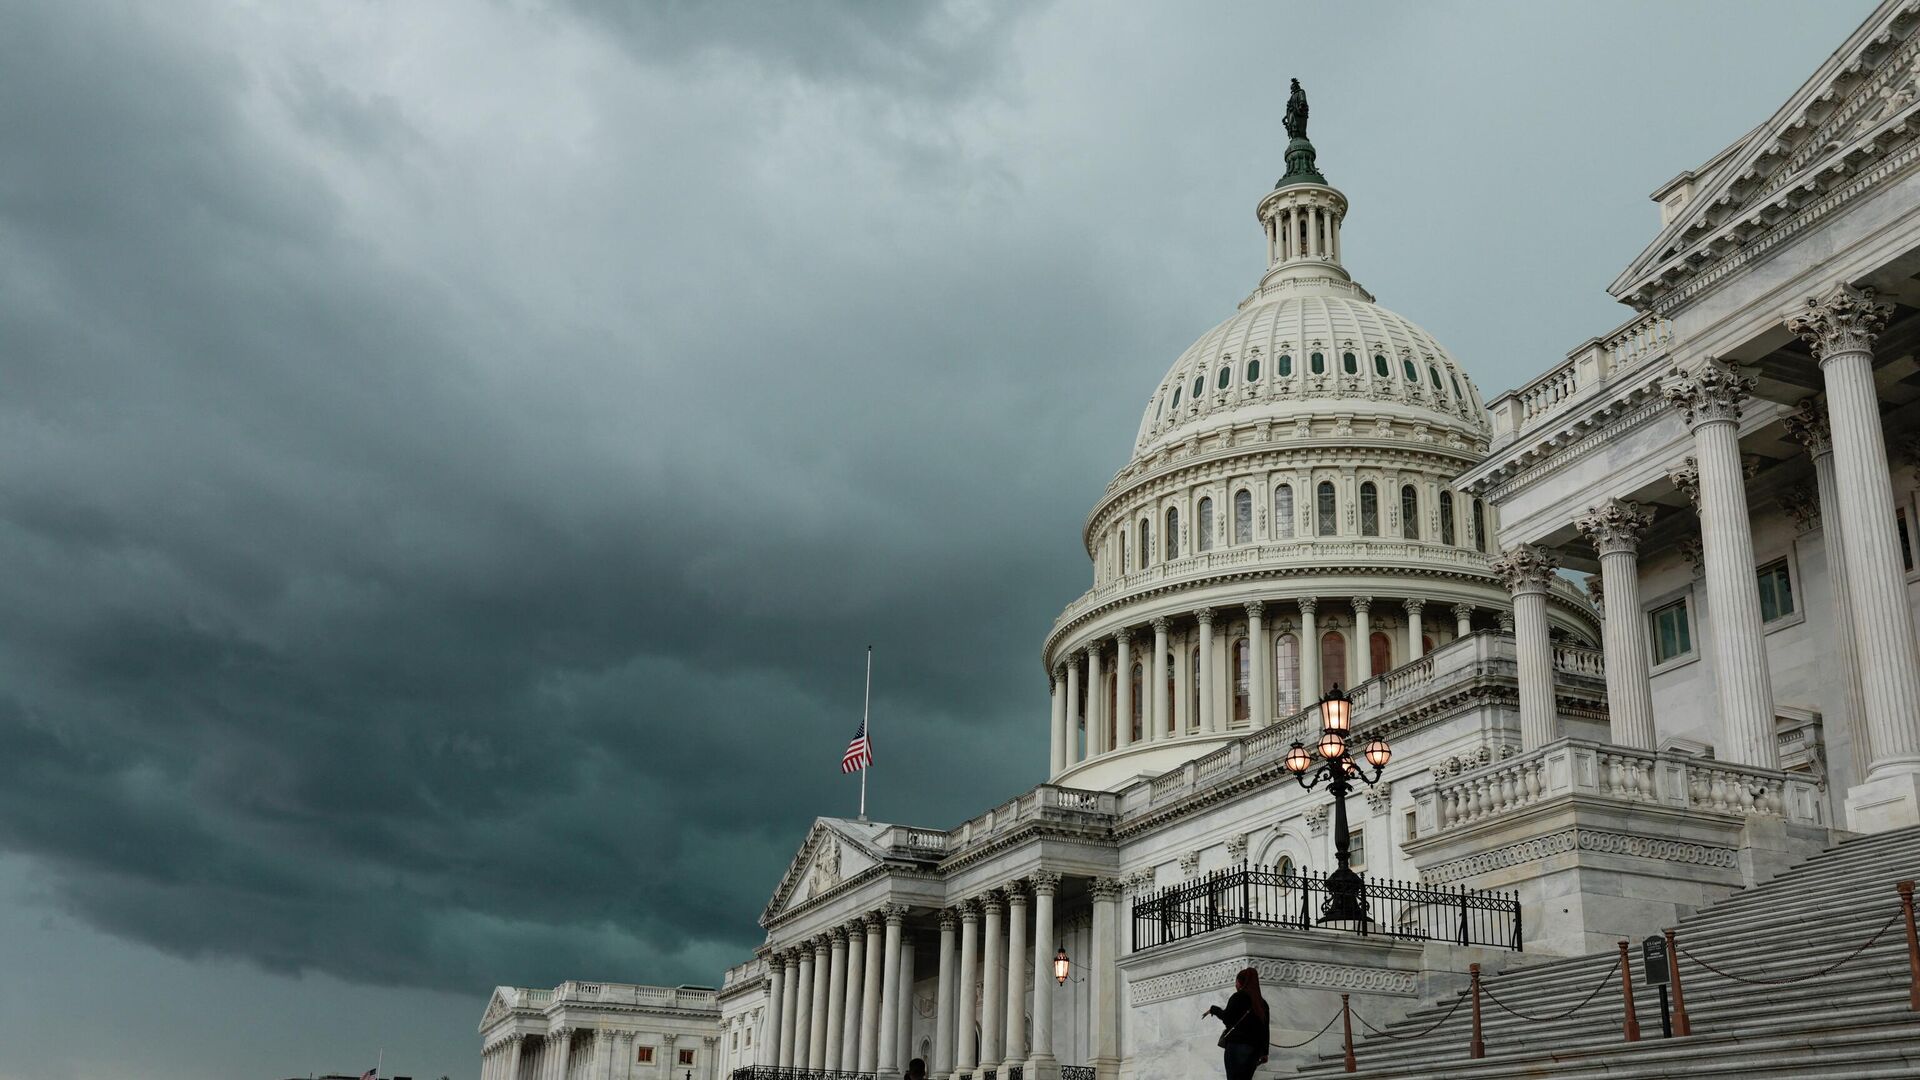 A storm cloud hangs over the U.S. Capitol Building on May 16, 2022 in Washington, DC. - Sputnik International, 1920, 17.05.2022